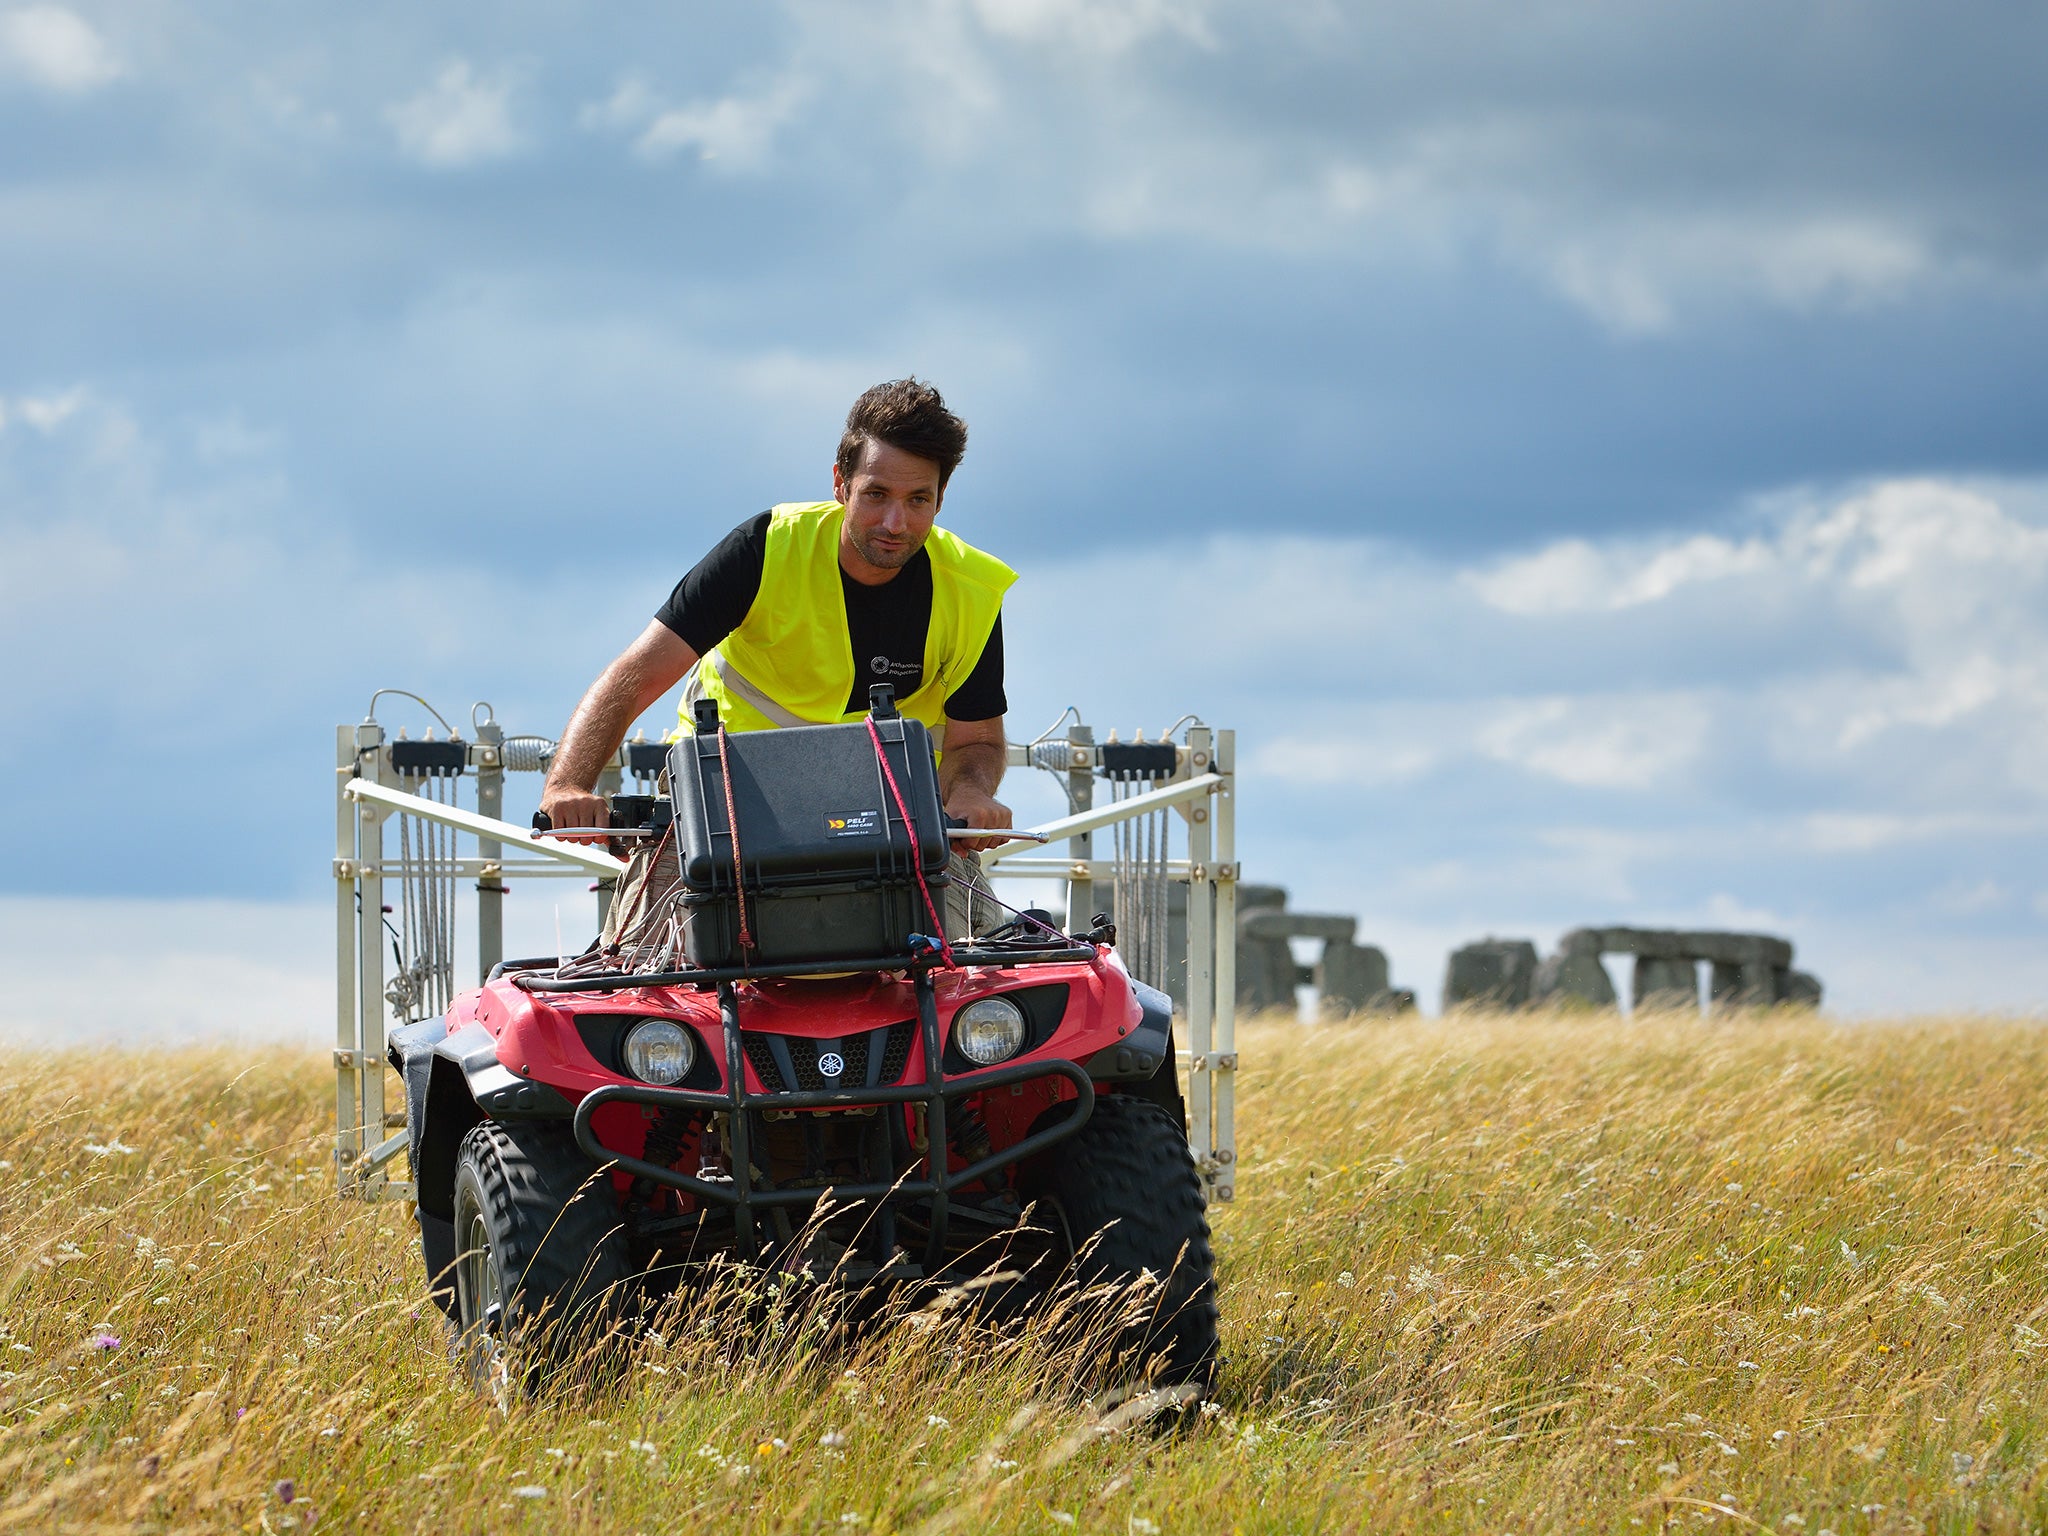 A motorized magnetometer system being used to survey the land around Stonehenge